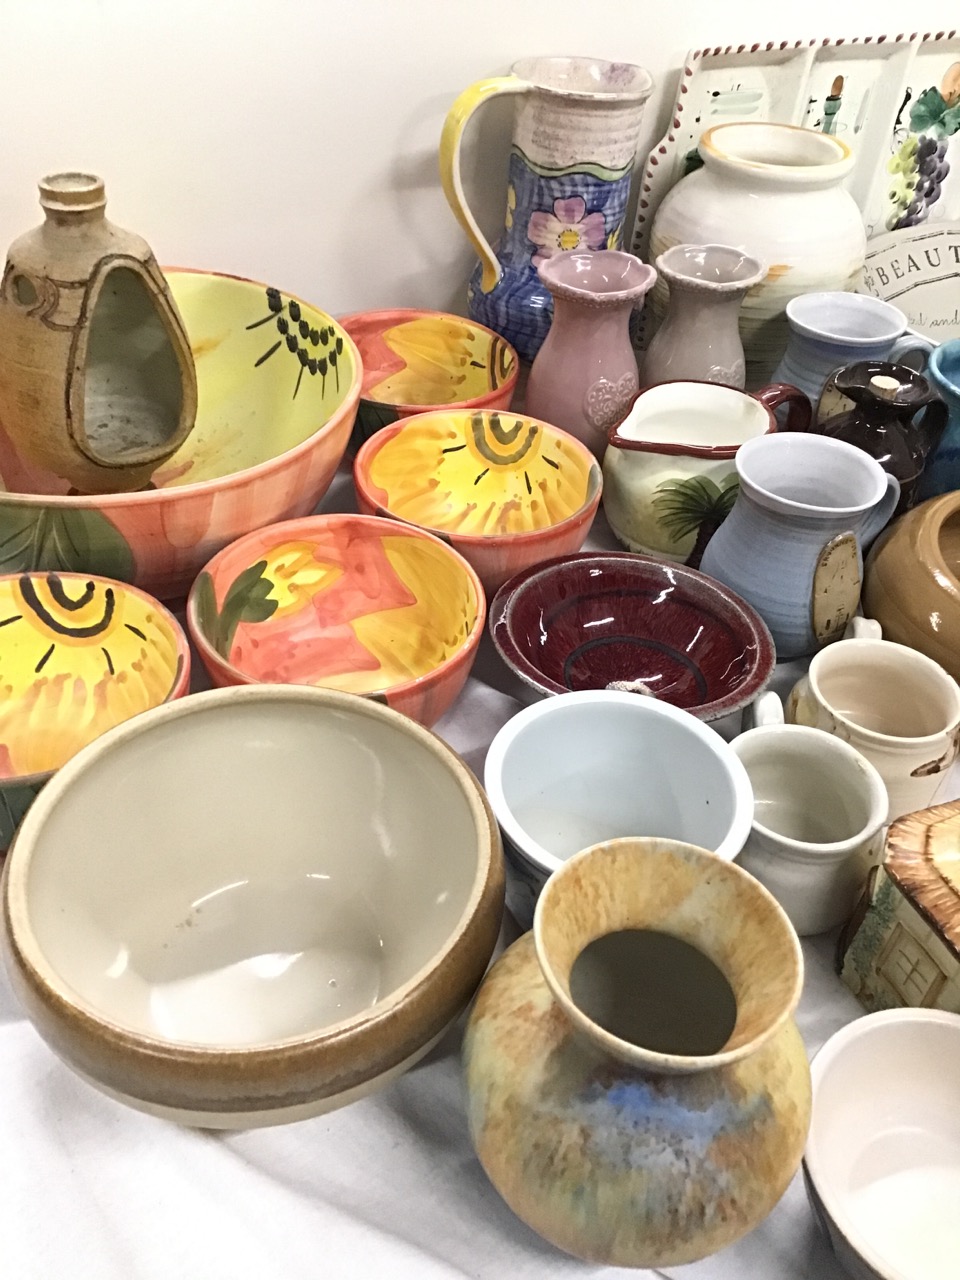 Miscellaneous ceramics - studio pottery bowls, mugs, vases & candle holder, a handpainted art deco - Image 2 of 3